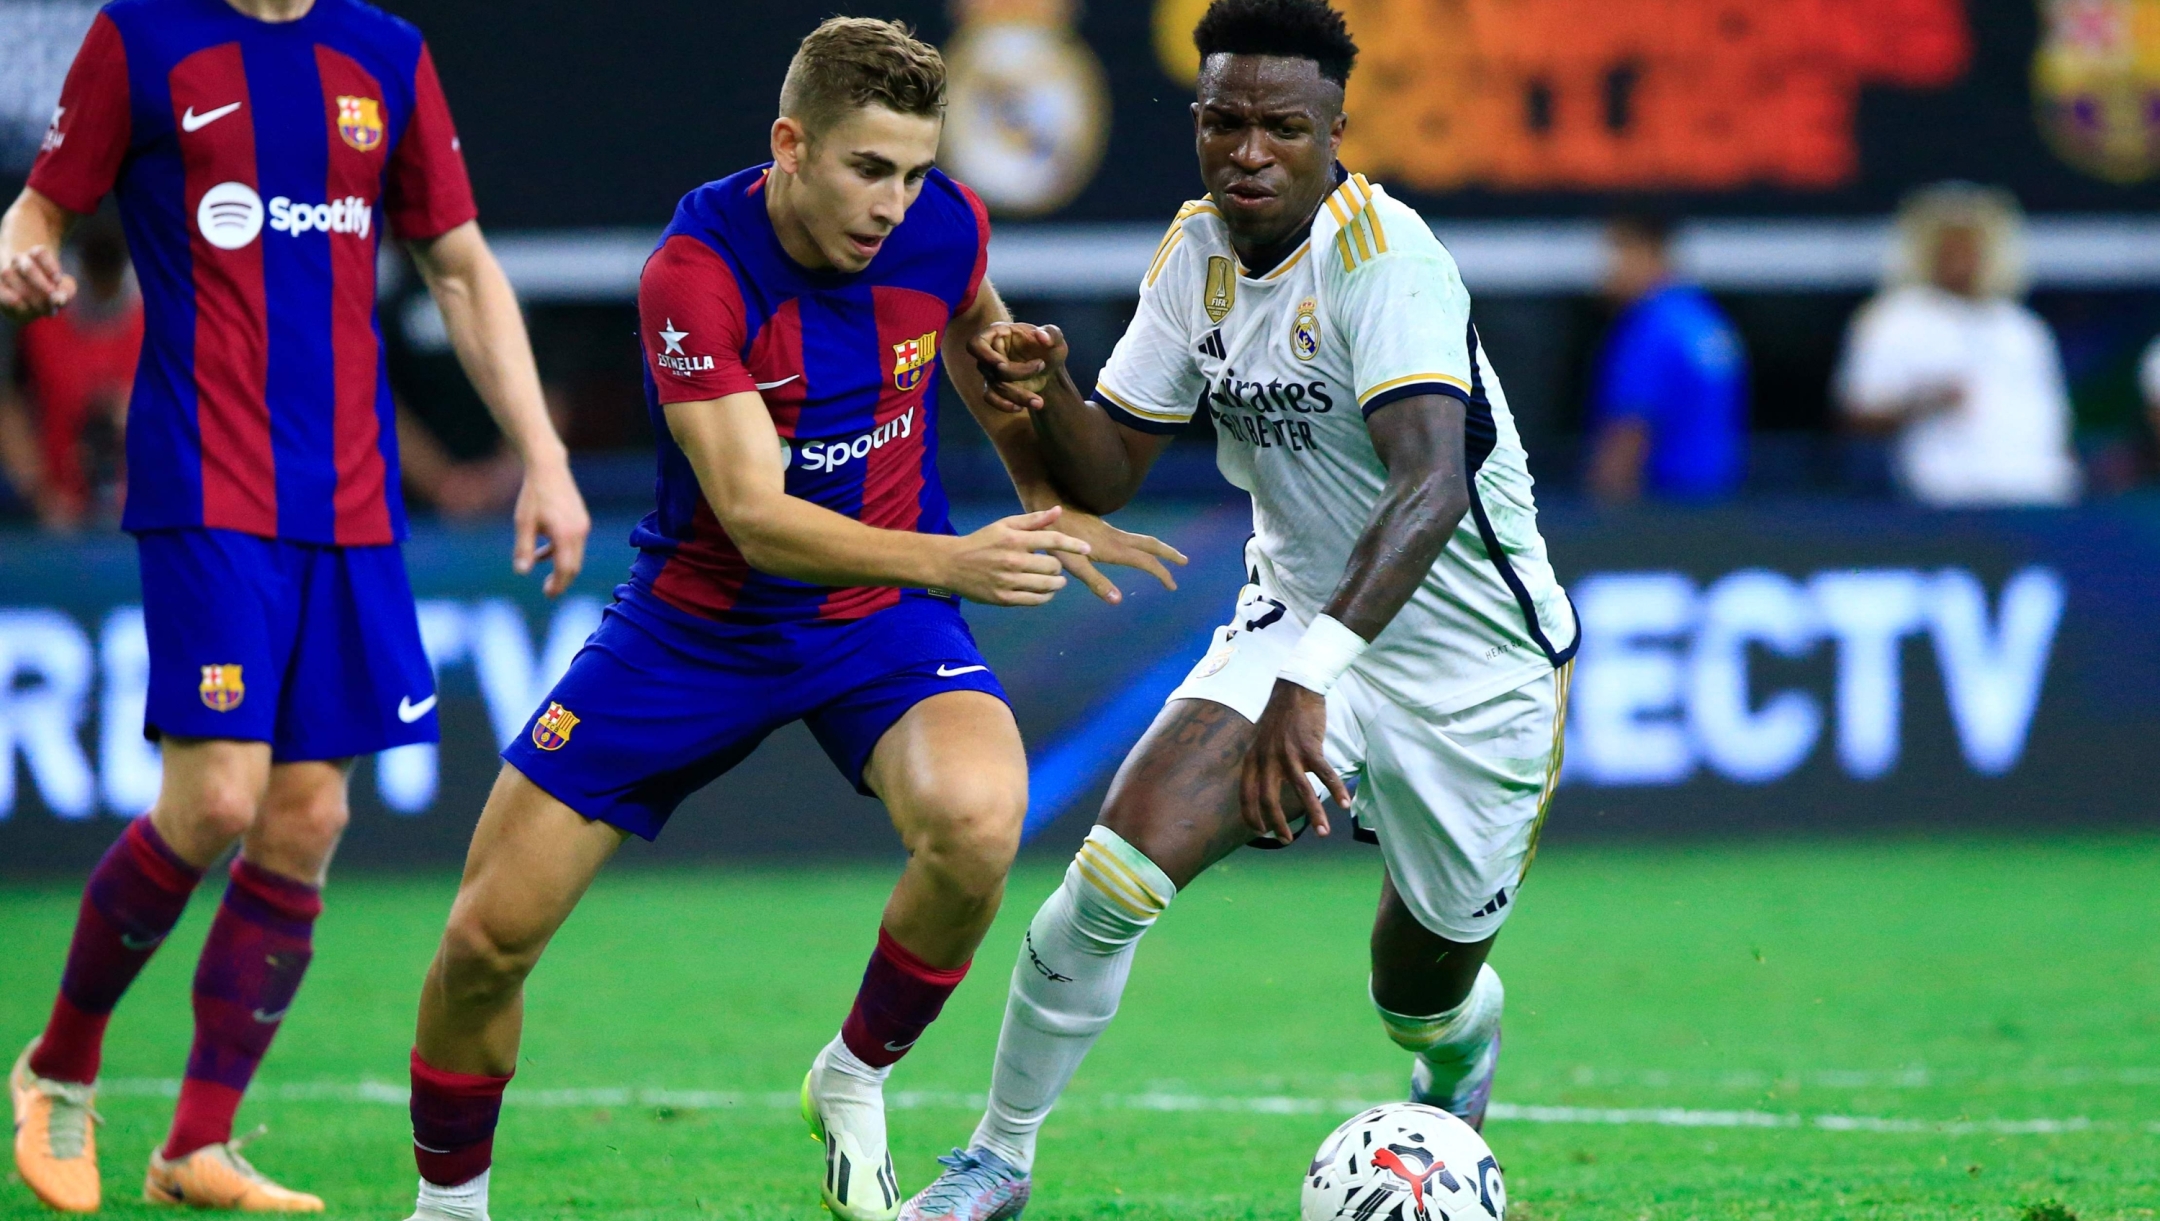 Real Madrid's Brazilian forward Vini Jr. (R) vies for the ball with Barcelona' Spanish forward Fermin Lopez during a pre-season friendly football match between FC Barcelona and Real Madrid CF at AT&T Stadium in Arlington, Texas on July 29, 2023. (Photo by Aric Becker / AFP)